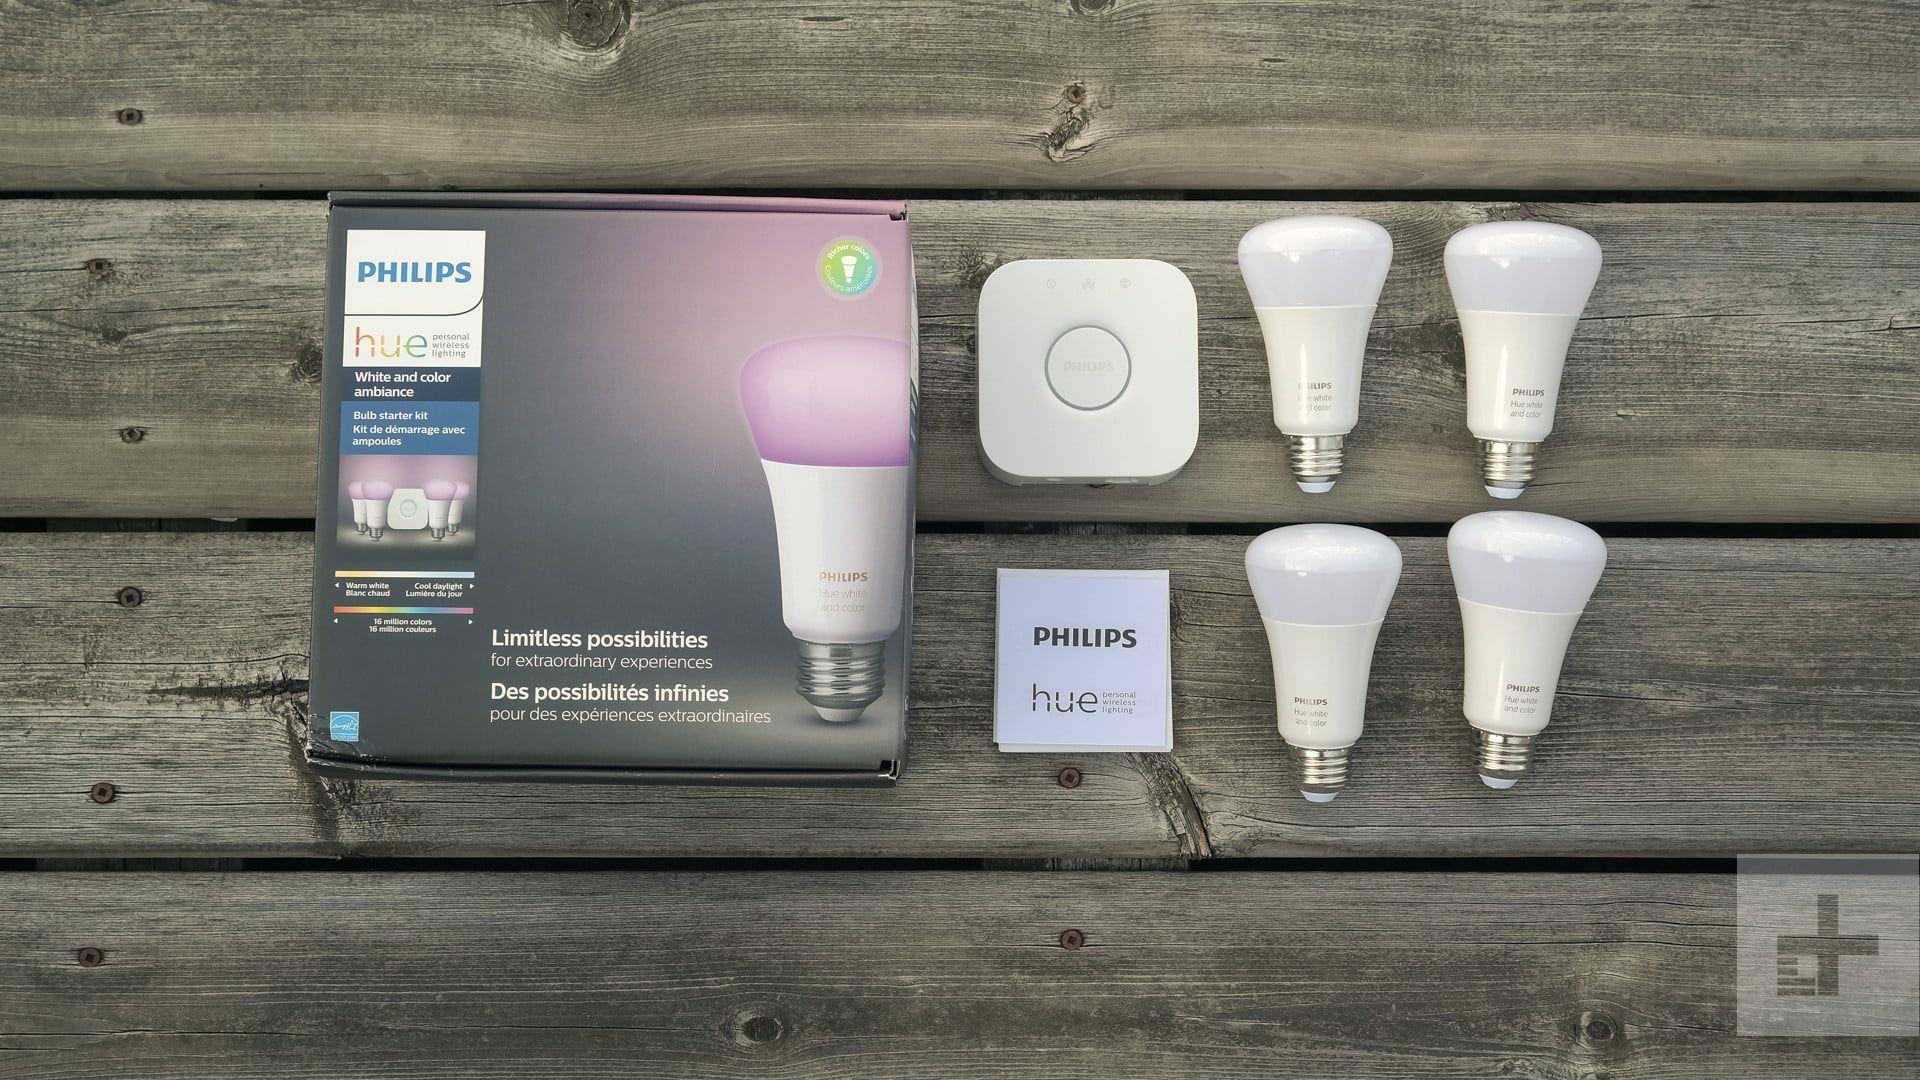 Cool Amazon Logo - Amazon Isn't Alone: Philips Hue Has Been Experiencing Holiday ...